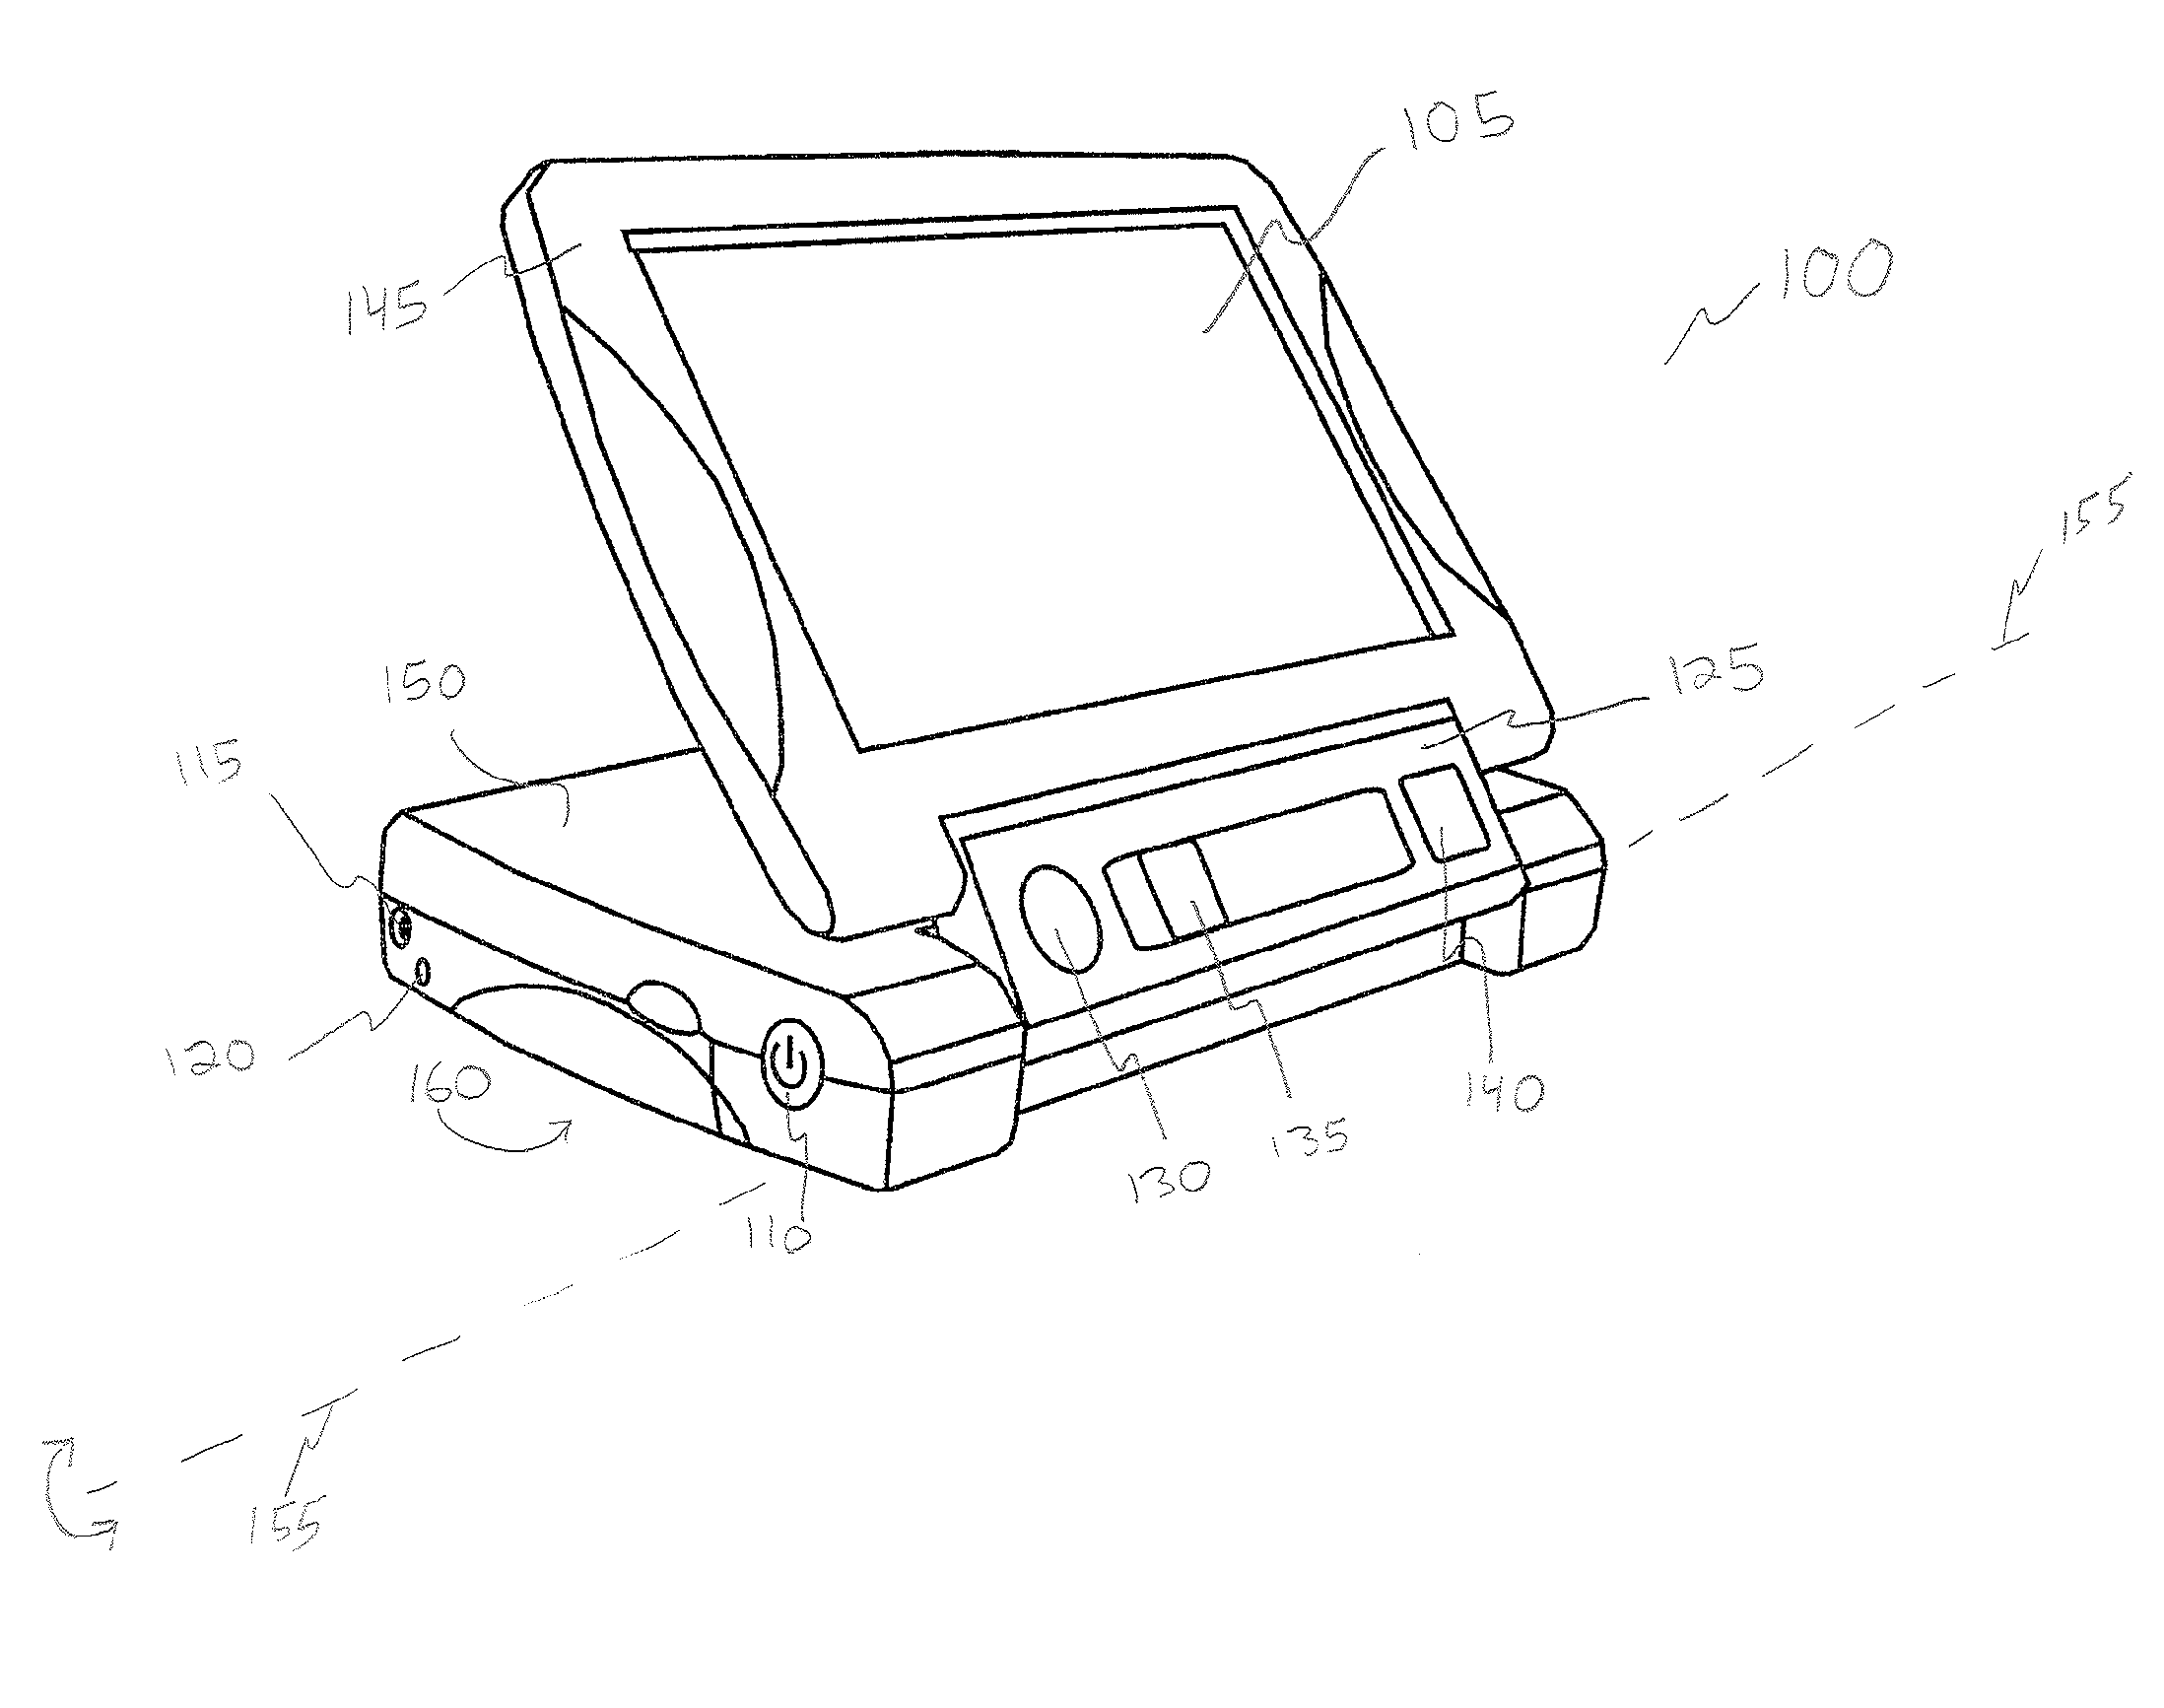 Systems and methods for imaging objects